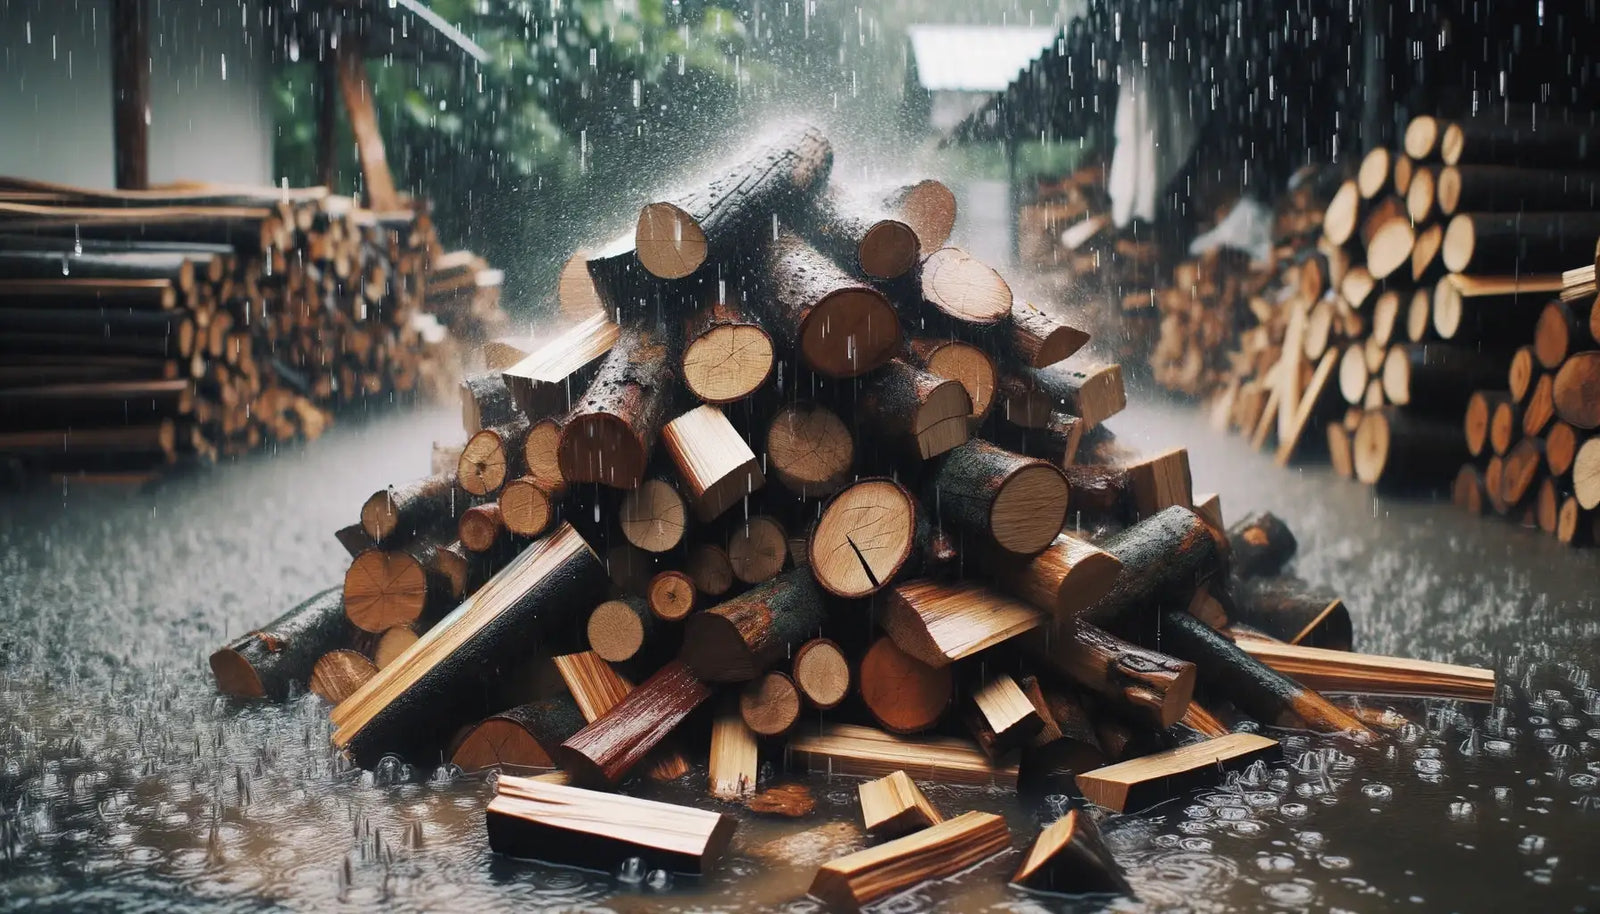 What if my firewood gets rained on?